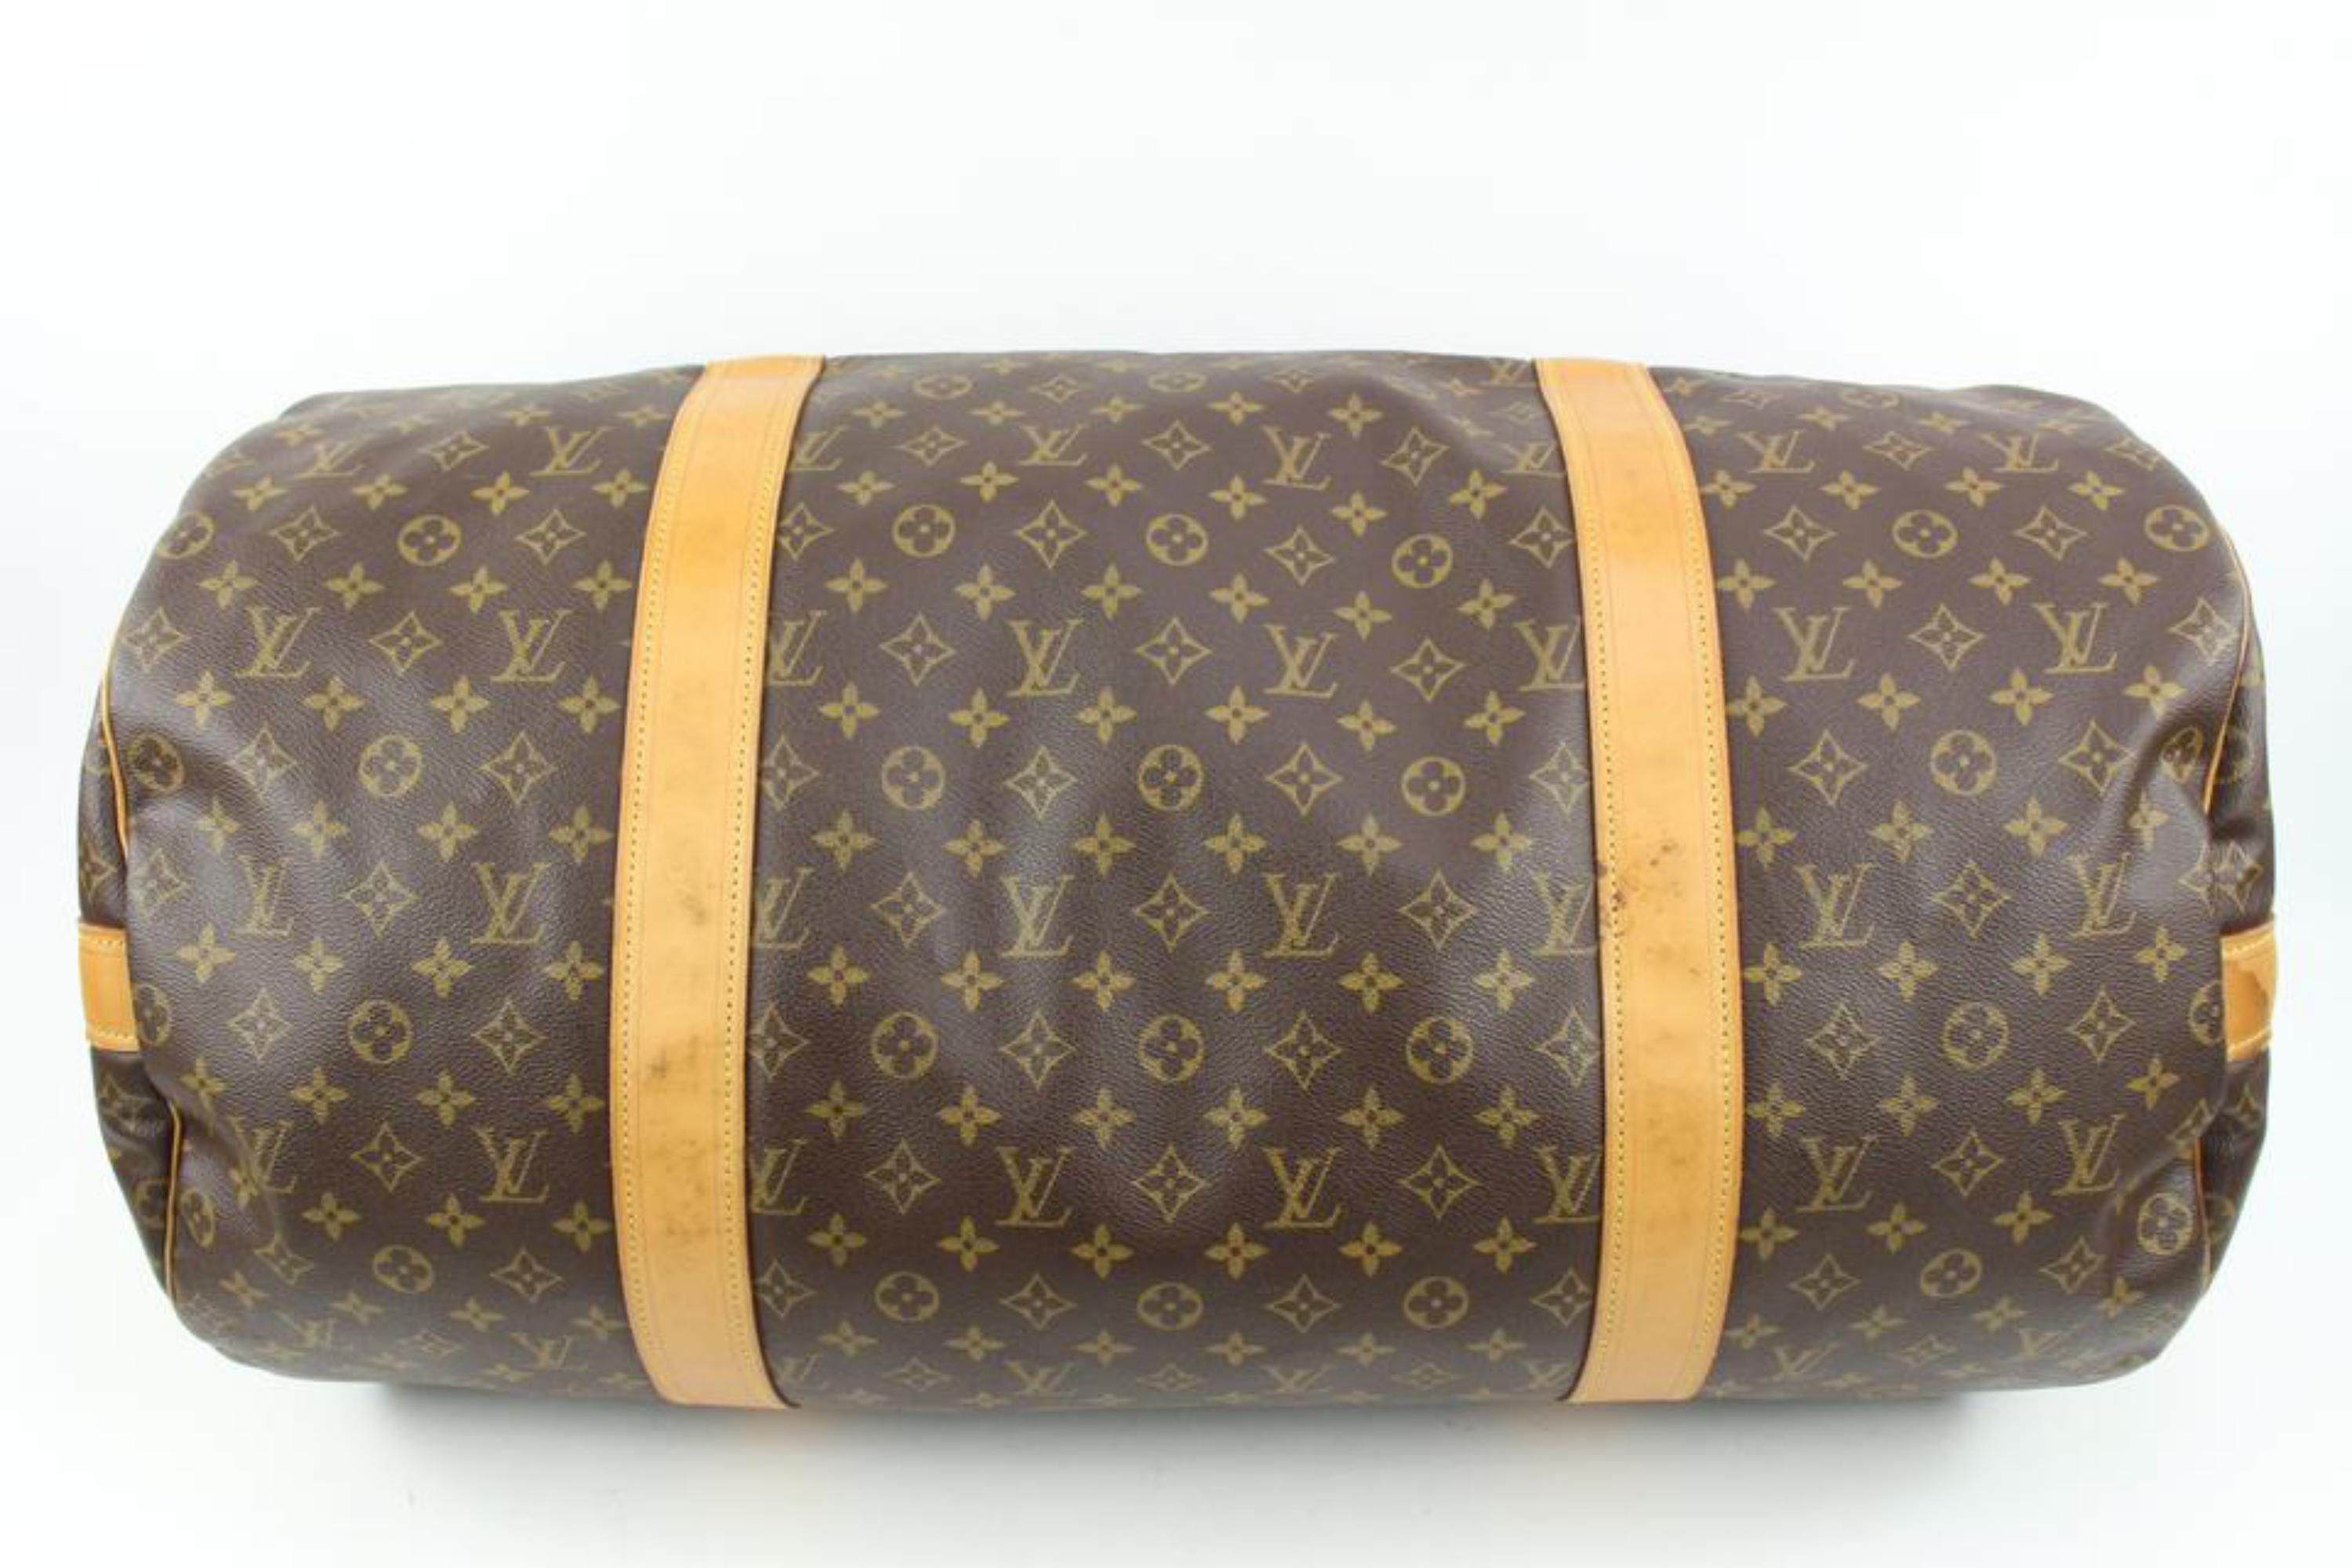 Louis Vuitton Discontinued Monogram Sac Polochon 70 Keepall Bandouliere 125lv36  For Sale 3